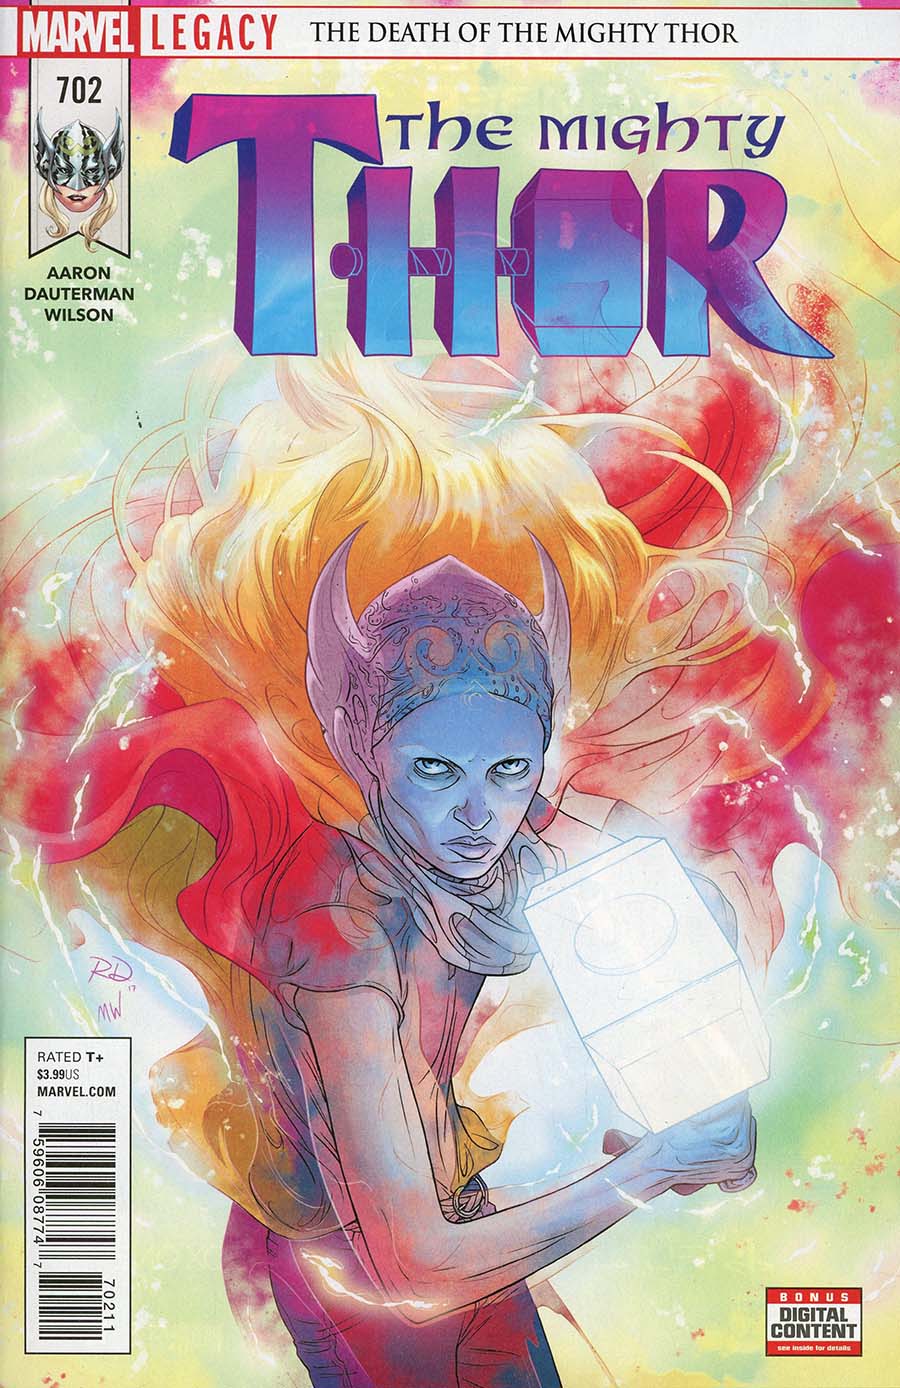 Mighty Thor Vol 2 #702 Cover A Regular Russell Dauterman Cover (Marvel Legacy Tie-In)